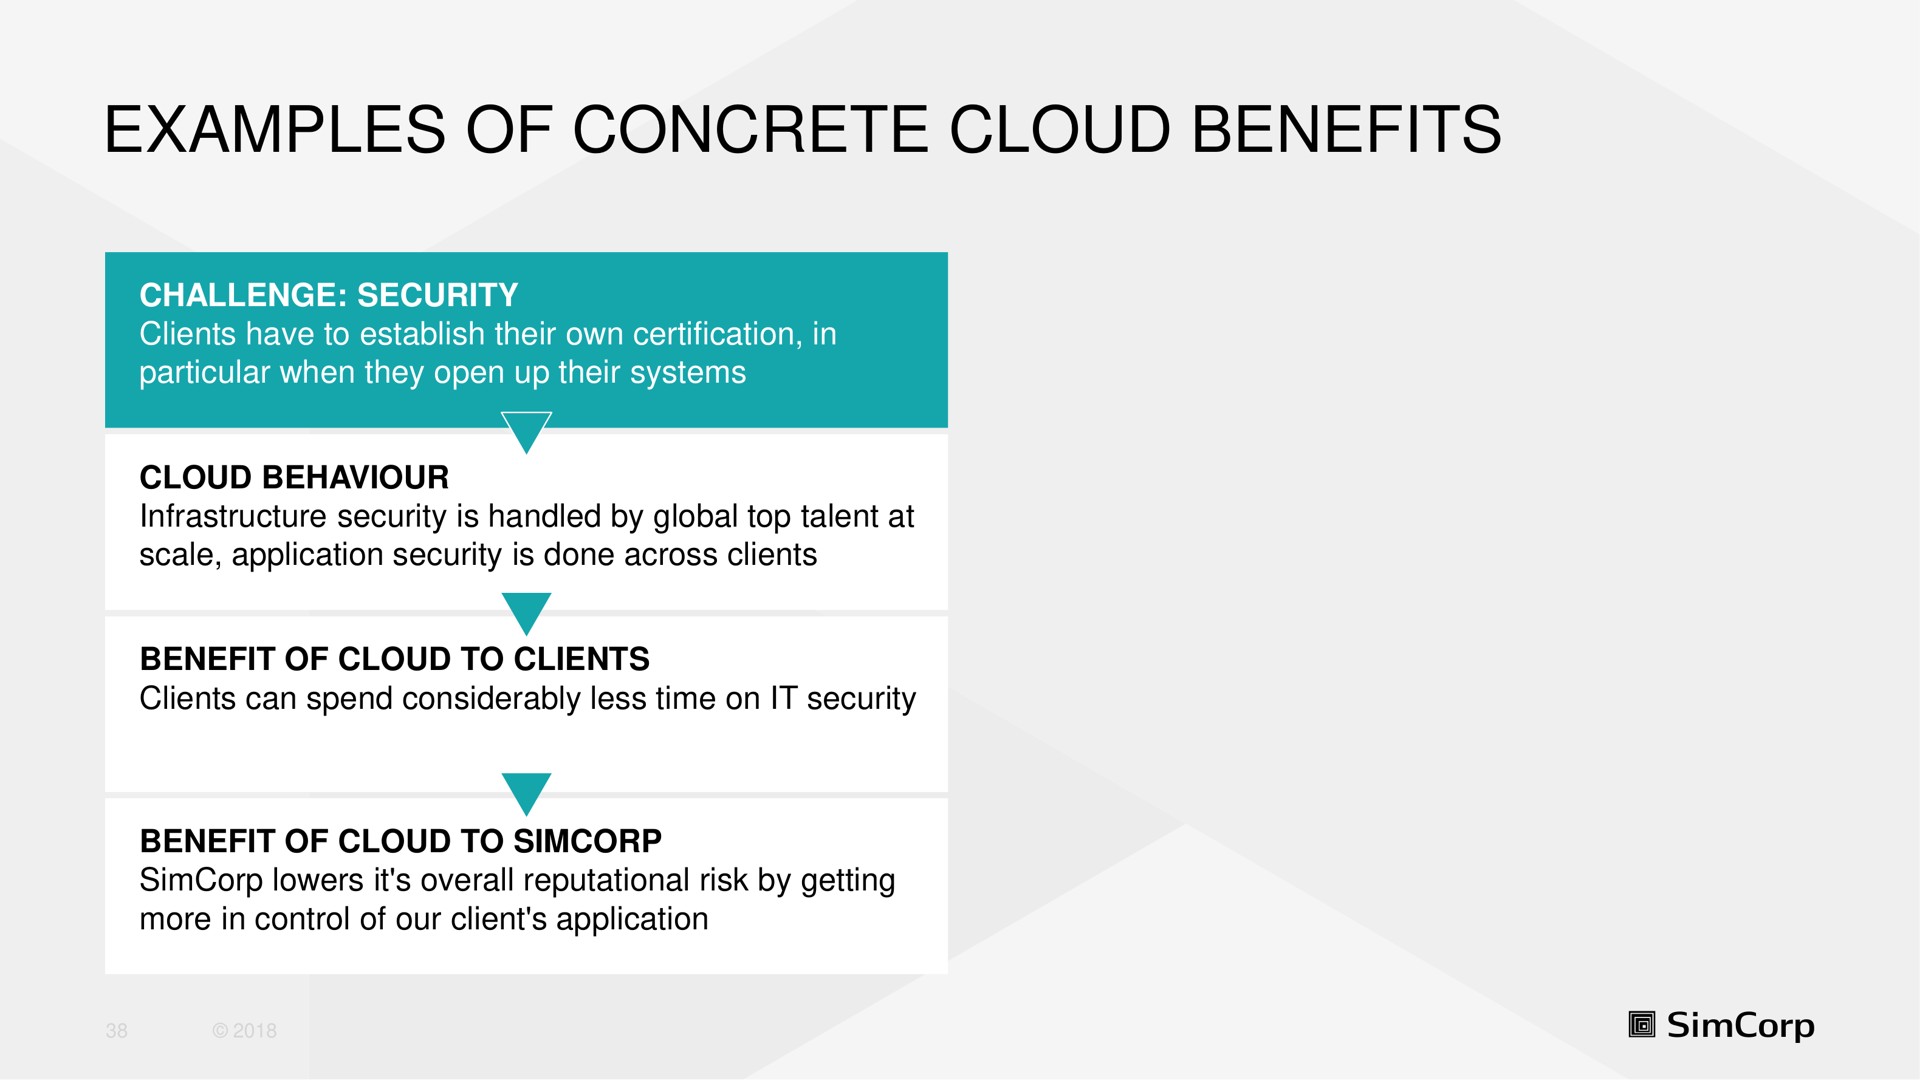 examples of concrete cloud benefits | SimCorp